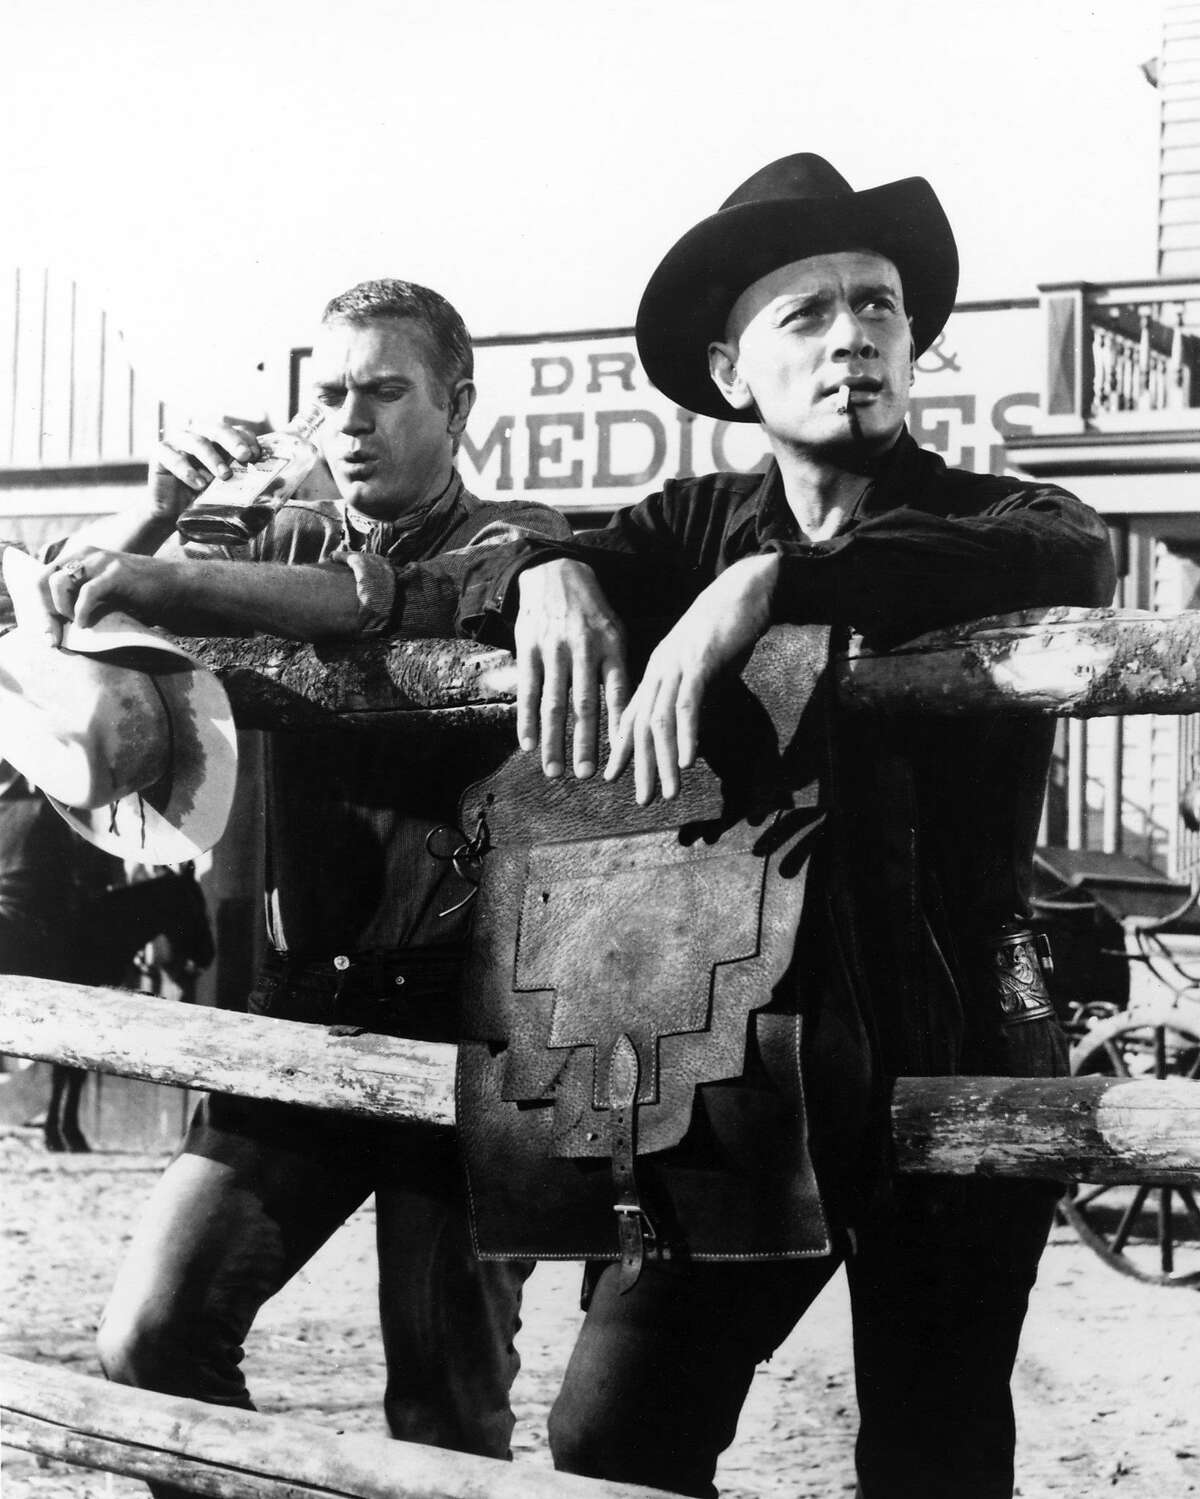 Steve McQueen (1930 - 1980) as Vin and Yul Brynner (1920 - 1985) as Chris in 'The Magnificent Seven', 1960. (Photo by Silver Screen Collection/Getty Images)